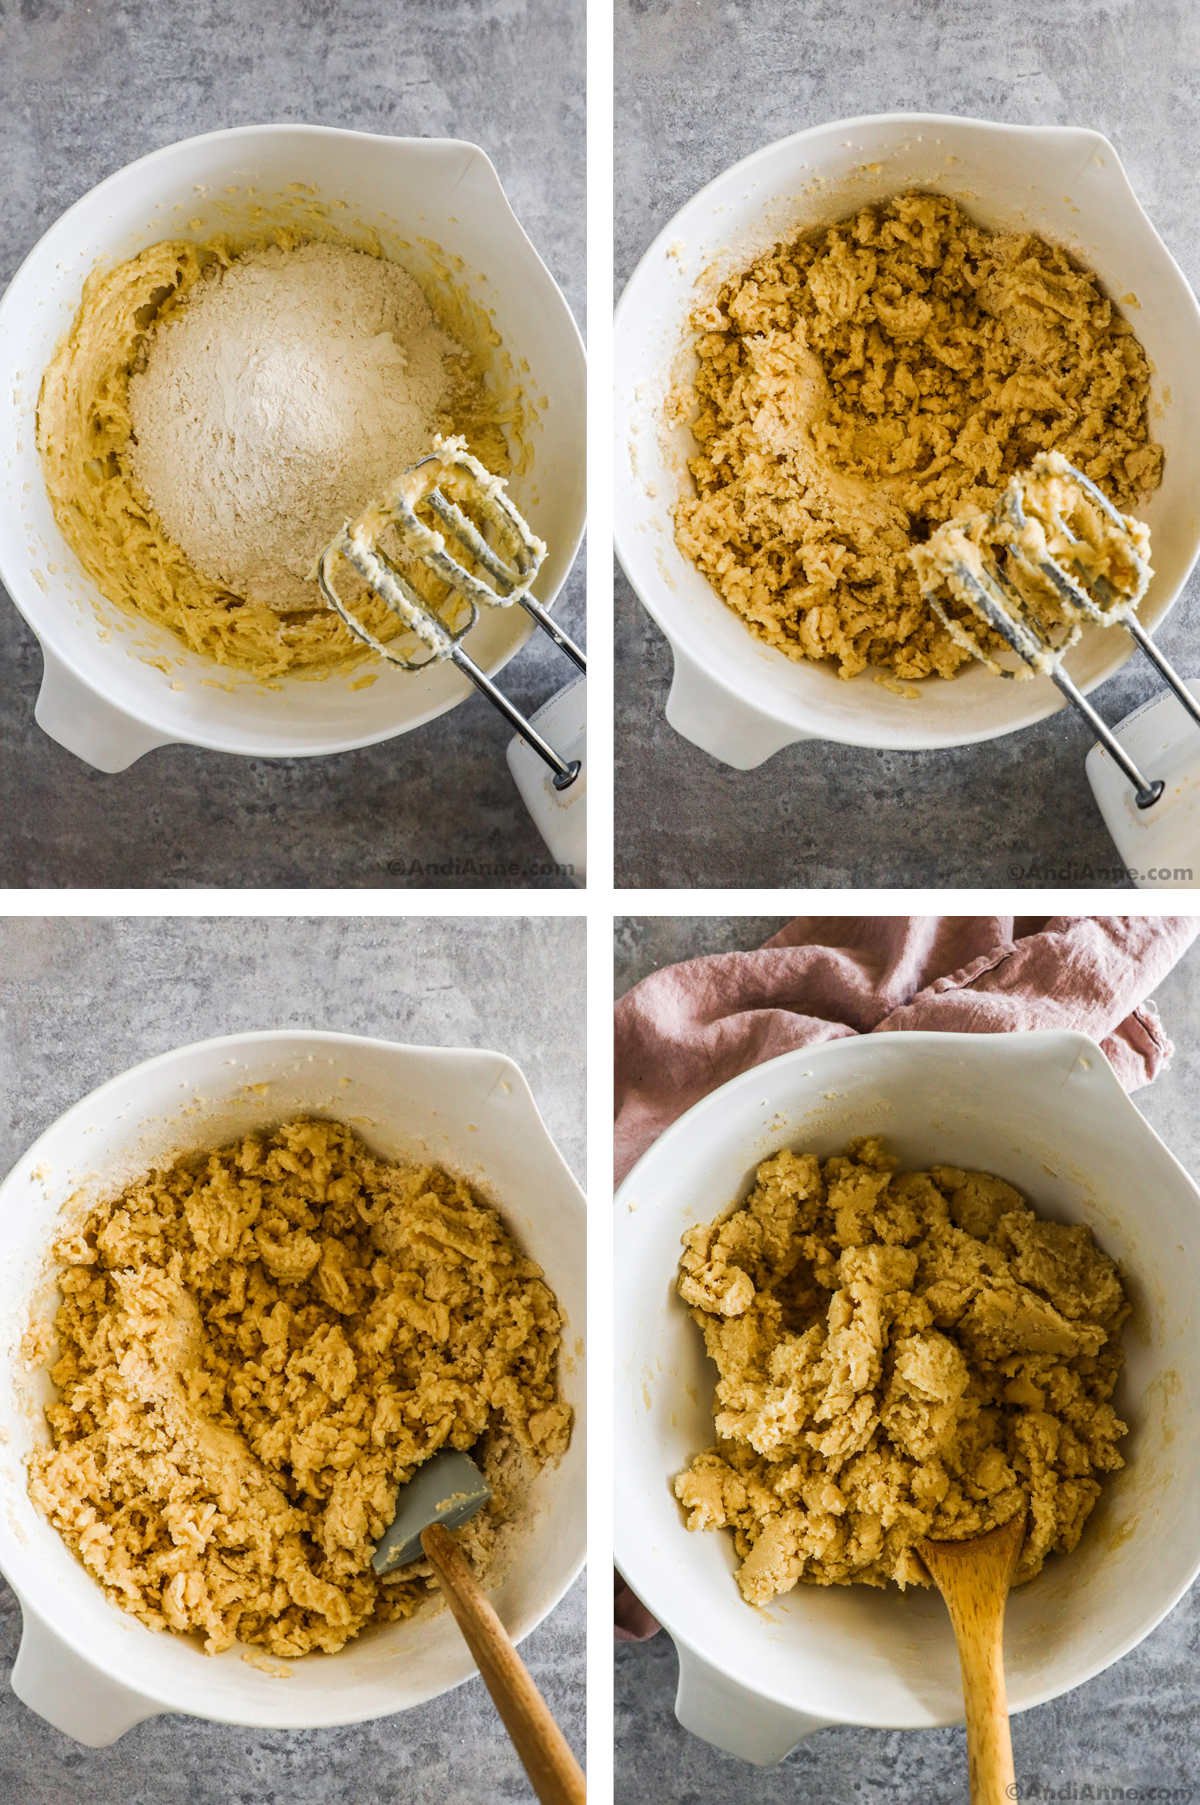 Four overhead images in one: 1. More dry ingredients added to batter in white bowl. 2. Ingredients mixed with hand mixer. 3. Dough is mixed with spatula. 4. Dough is mixed with spatula after more dry ingredients added. 